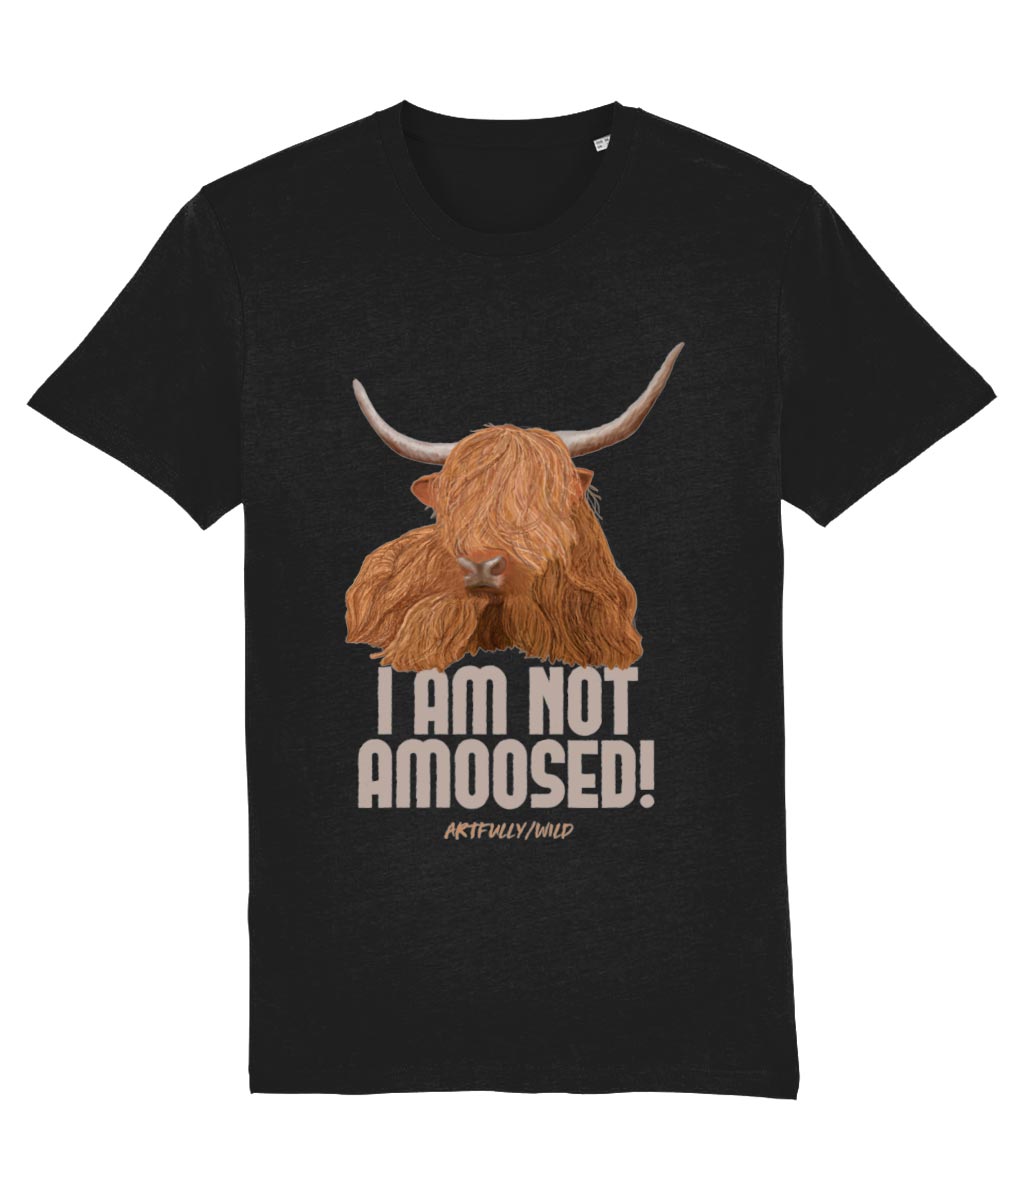 'I AM NOT AMOOSED' Print on Black Eco-friendly T-Shirt. Unisex/Women/Men. Certi-fied Organic Clothing. Original Highland Cow Illustration by Artfully/Wild. Printed in the UK.